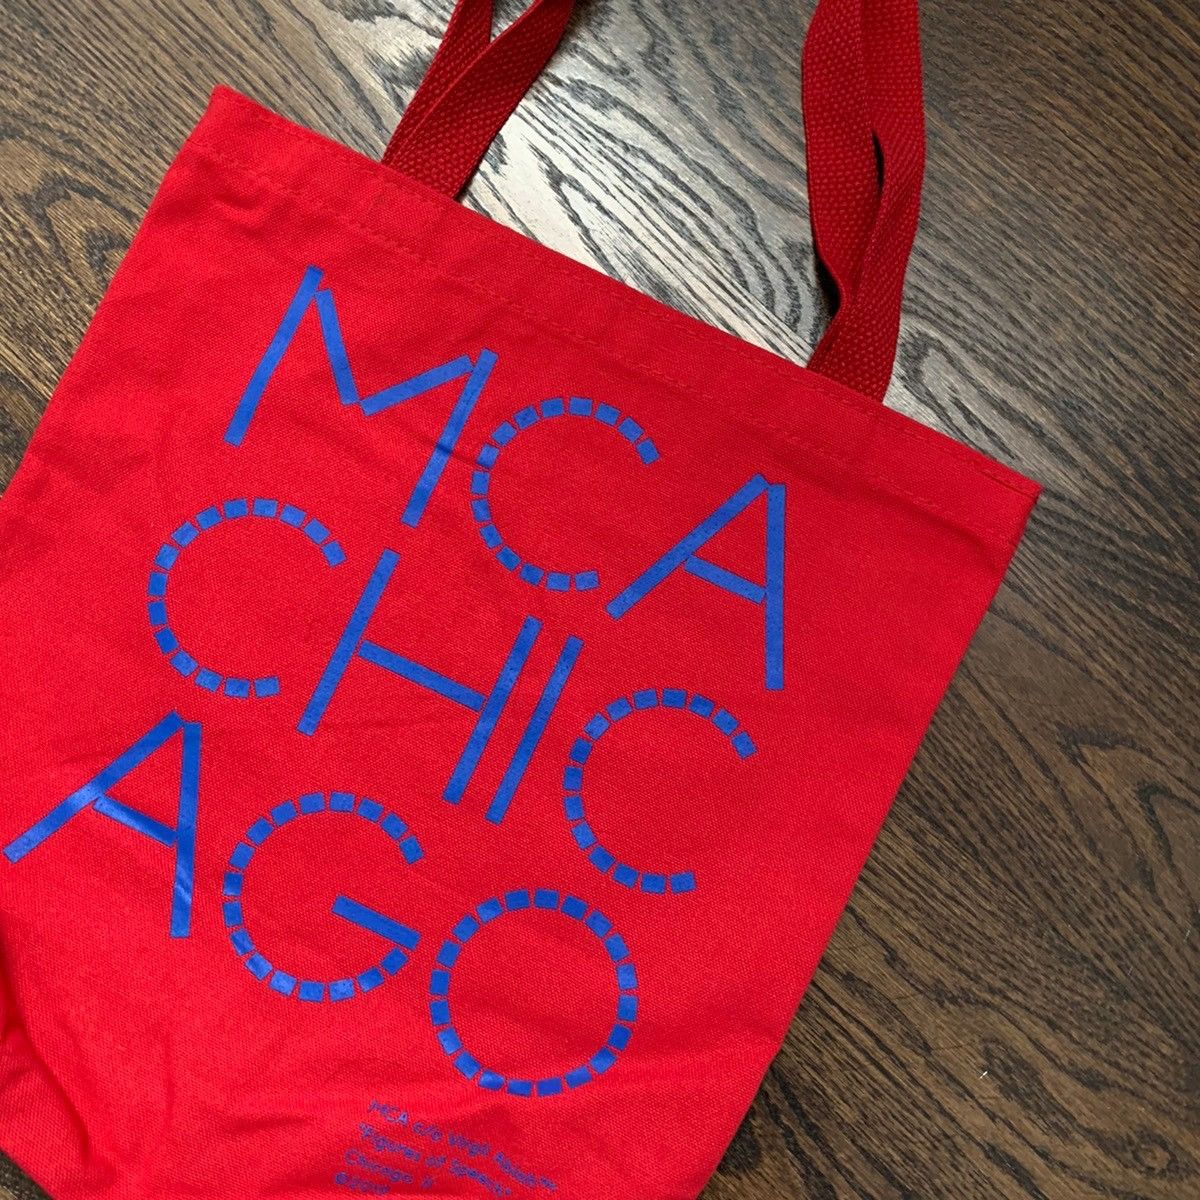 Virgil Abloh Virgil Abloh x MCA Chicago Hyperbole Quote Tote Bag in Red Size ONE SIZE - 2 Preview